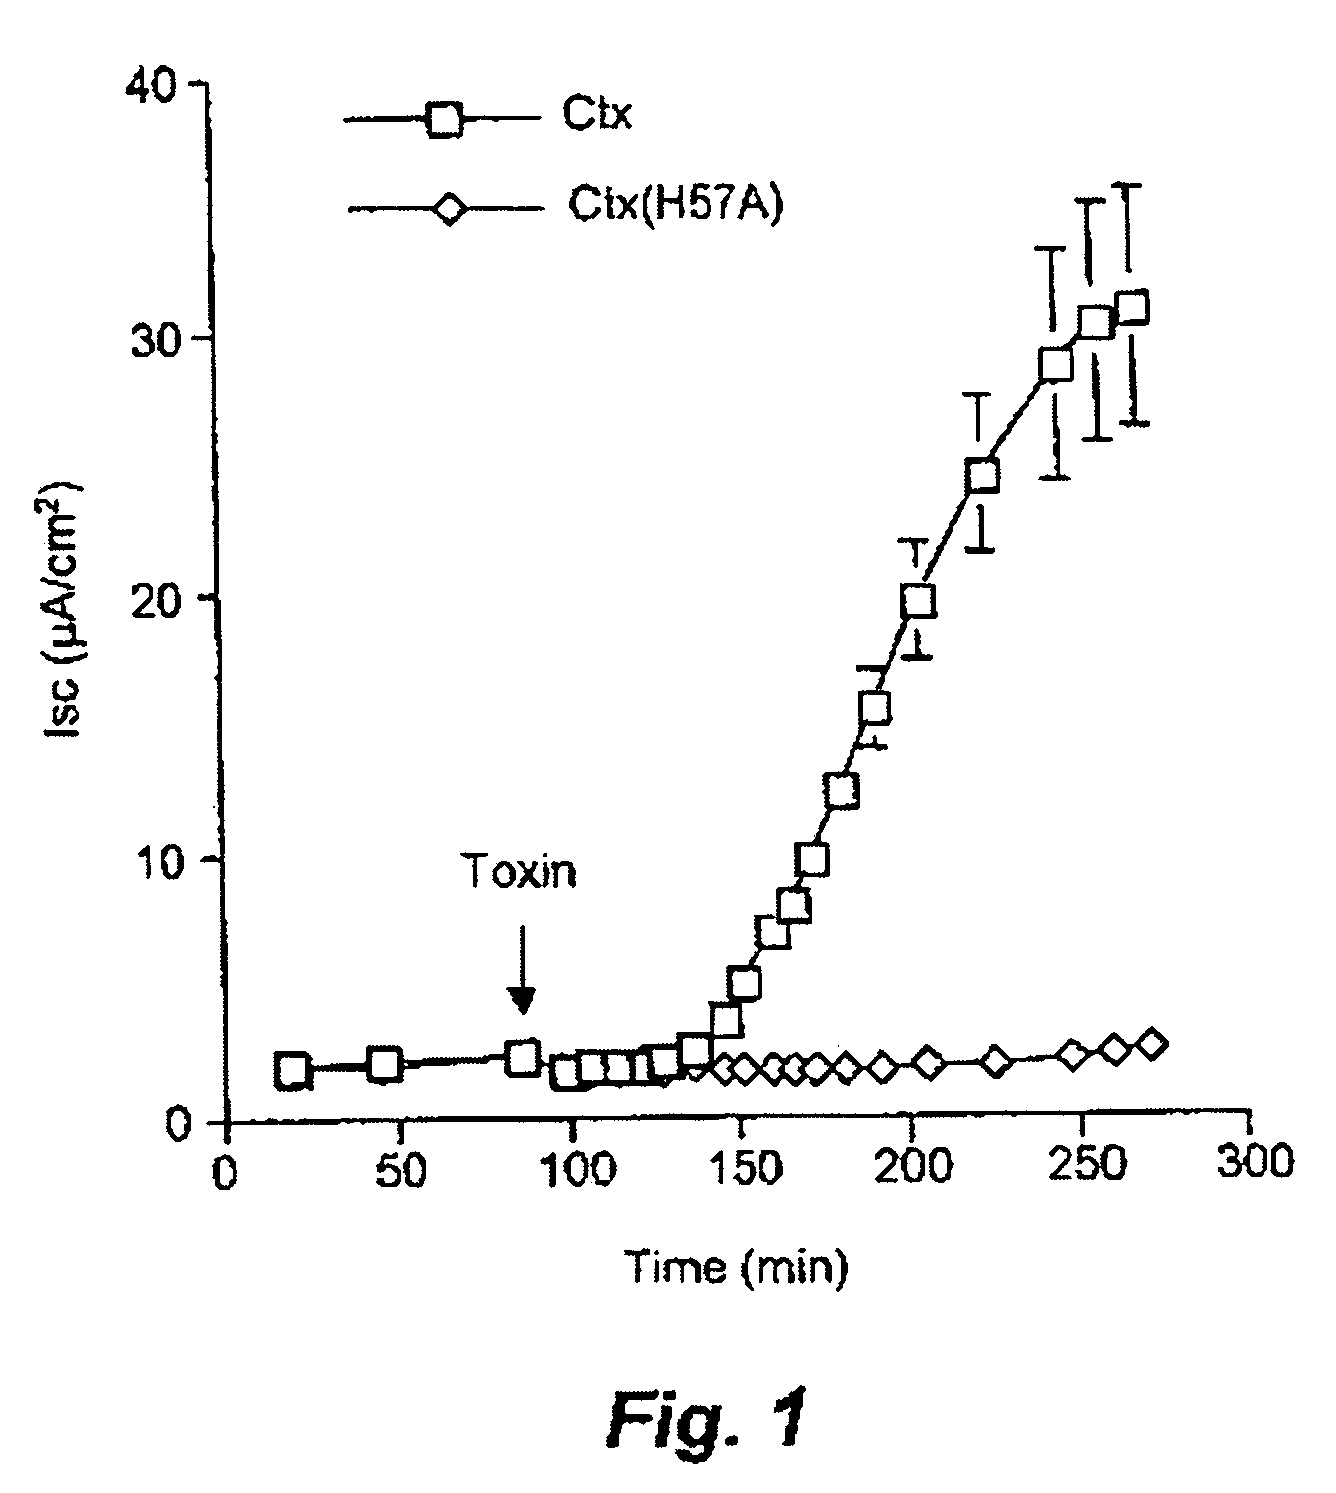 Mutant forms of EtxB and CtxB and their use as carriers